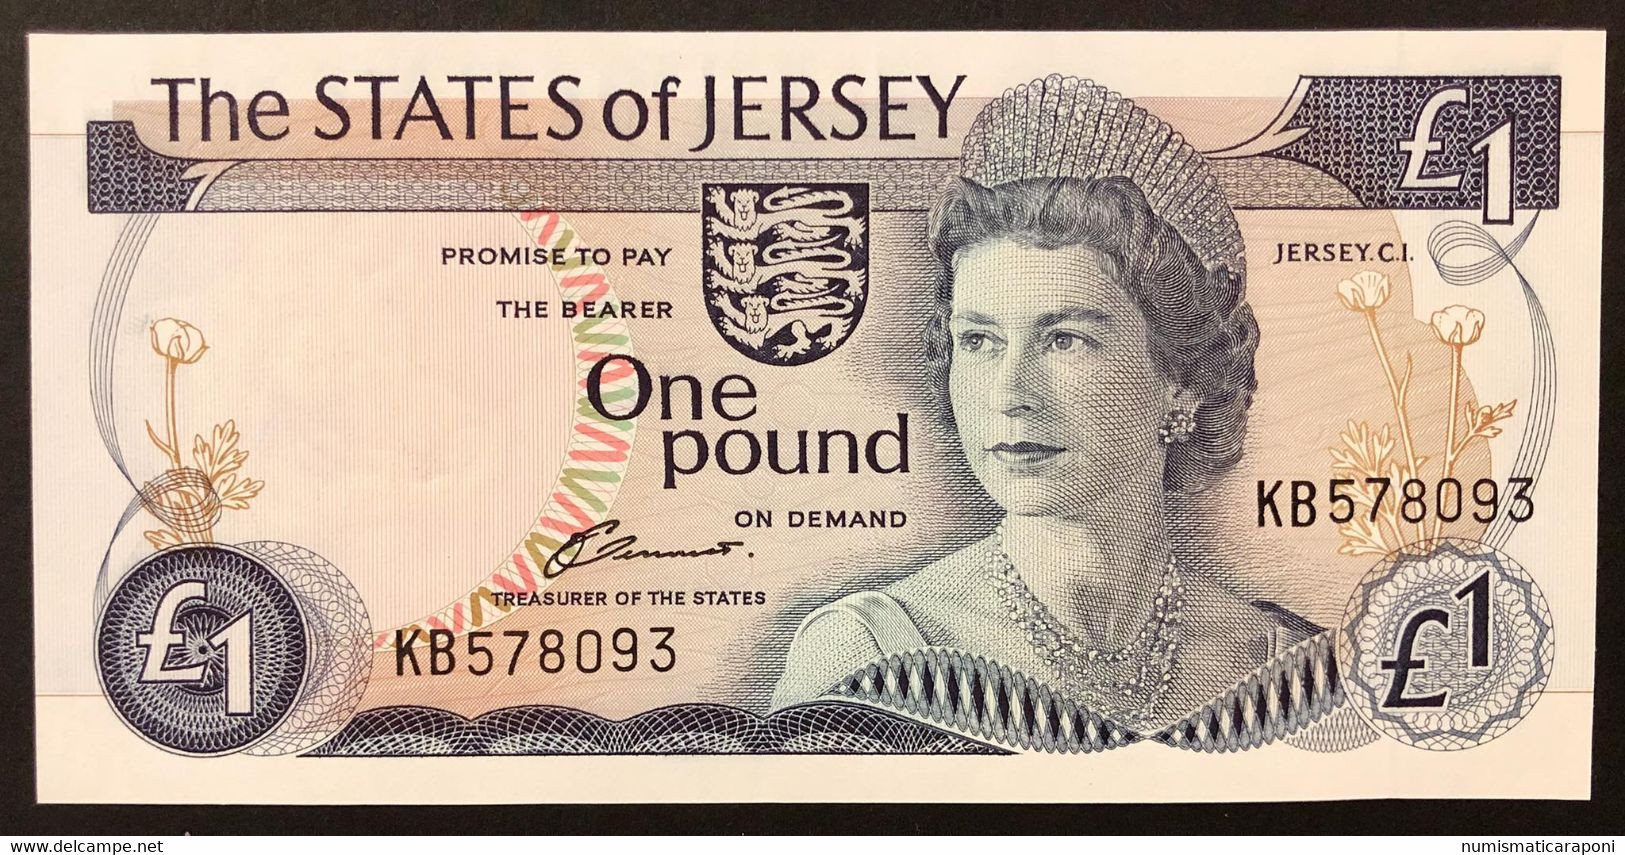 Jersey 1 Pound £ 1 1976 Pick#11a Queen Elisabeth IIa LOTTO 2618 - Jersey